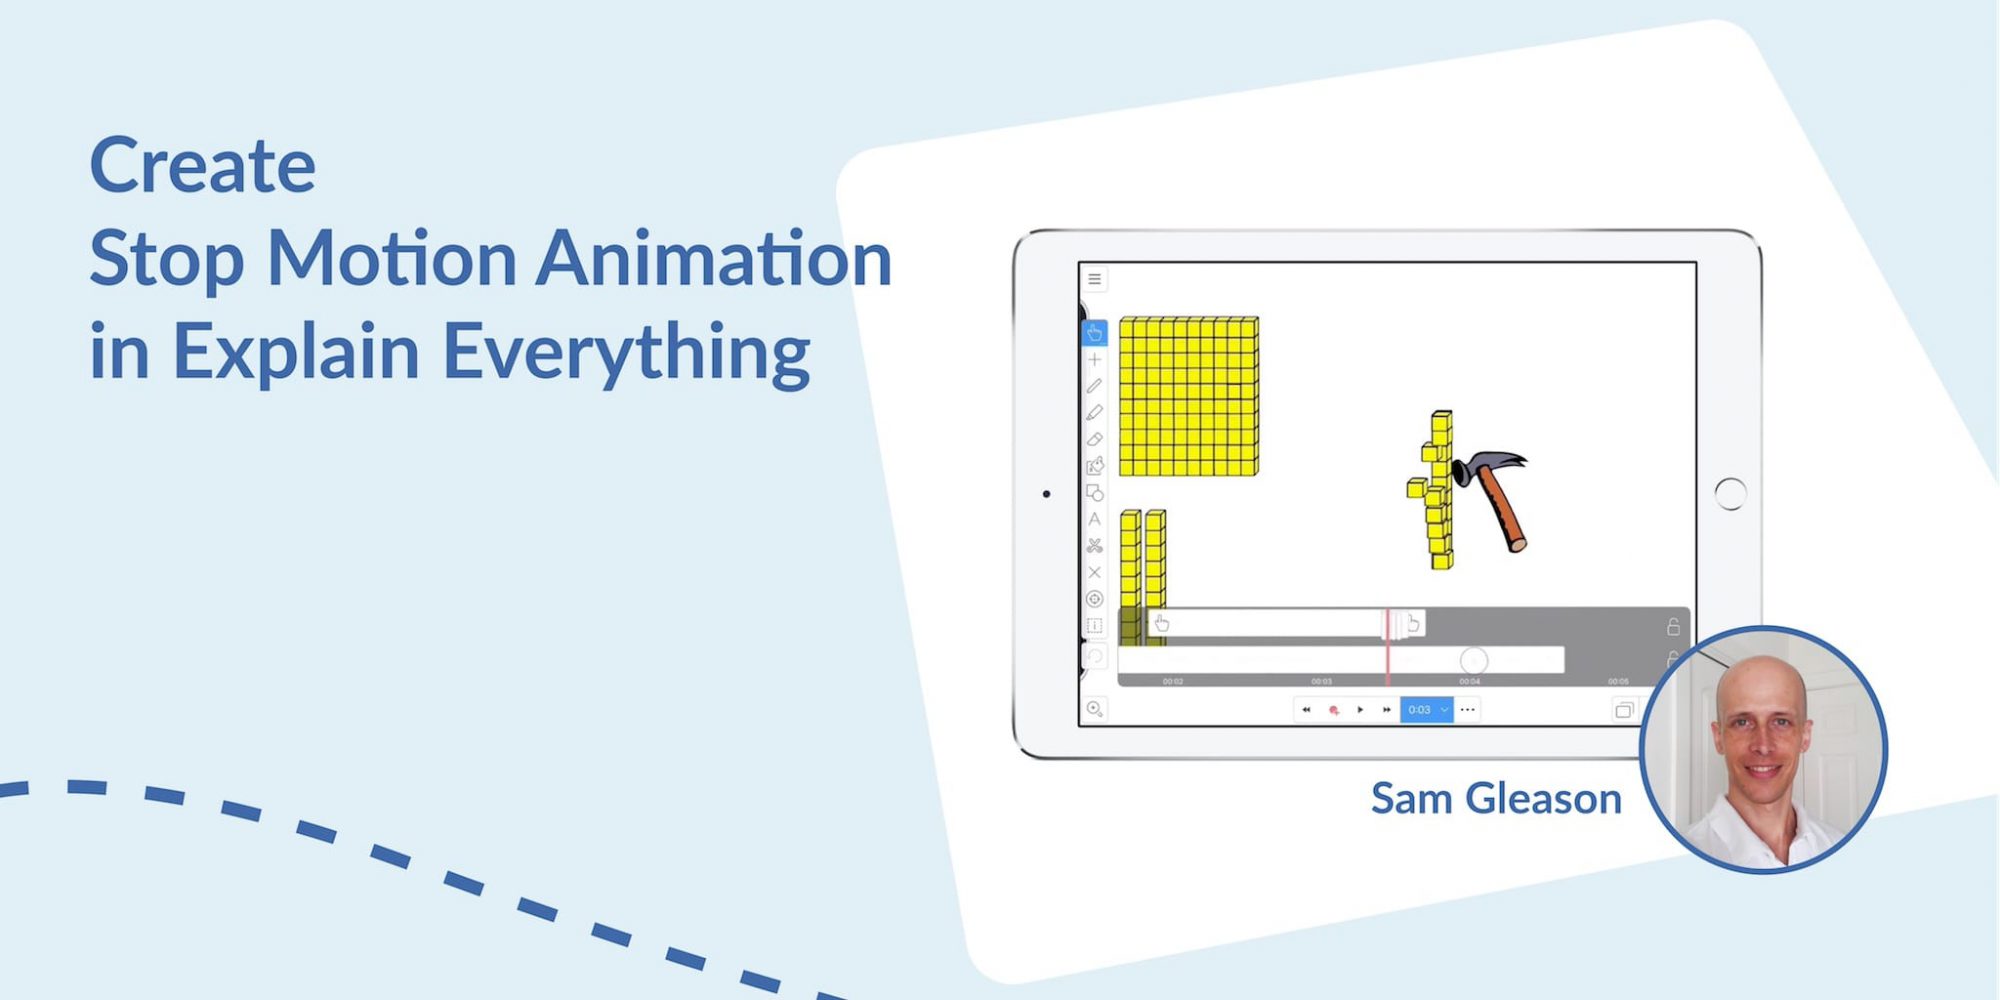 Create stop motion animation